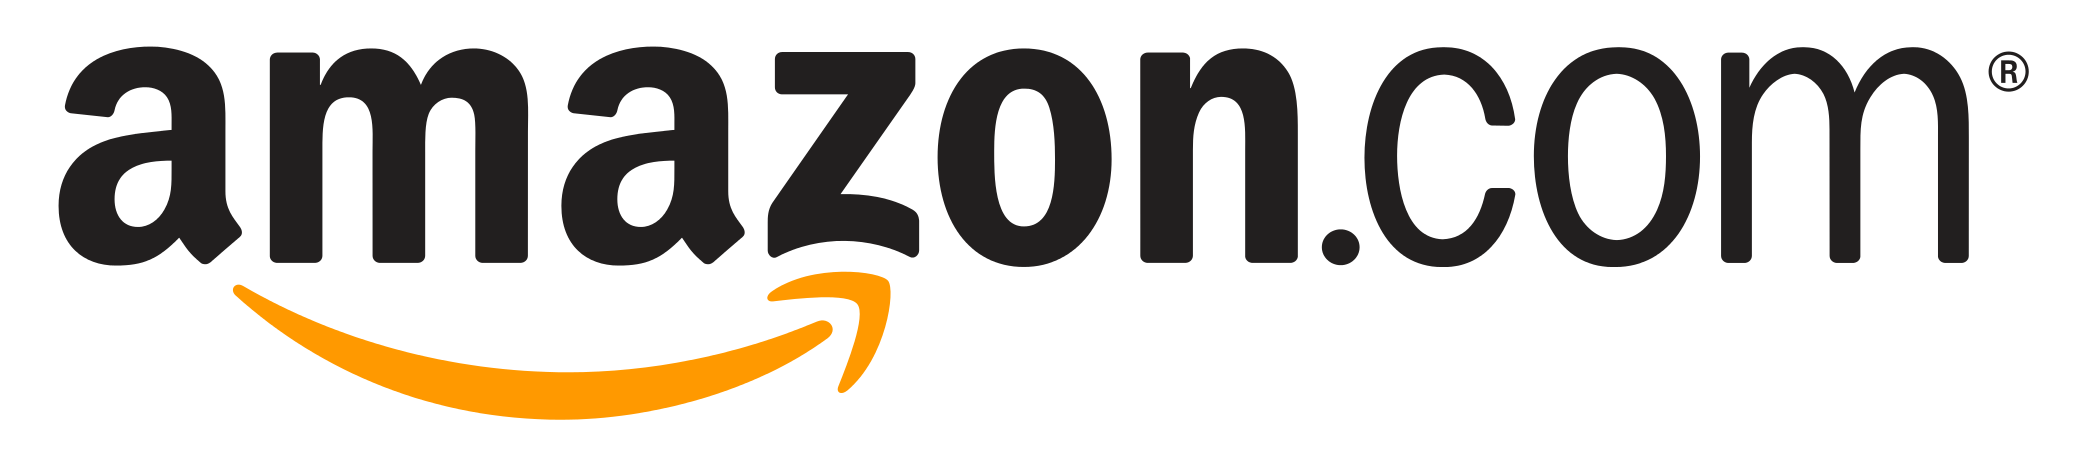 Download Amazon Com Logo Png Image For Free